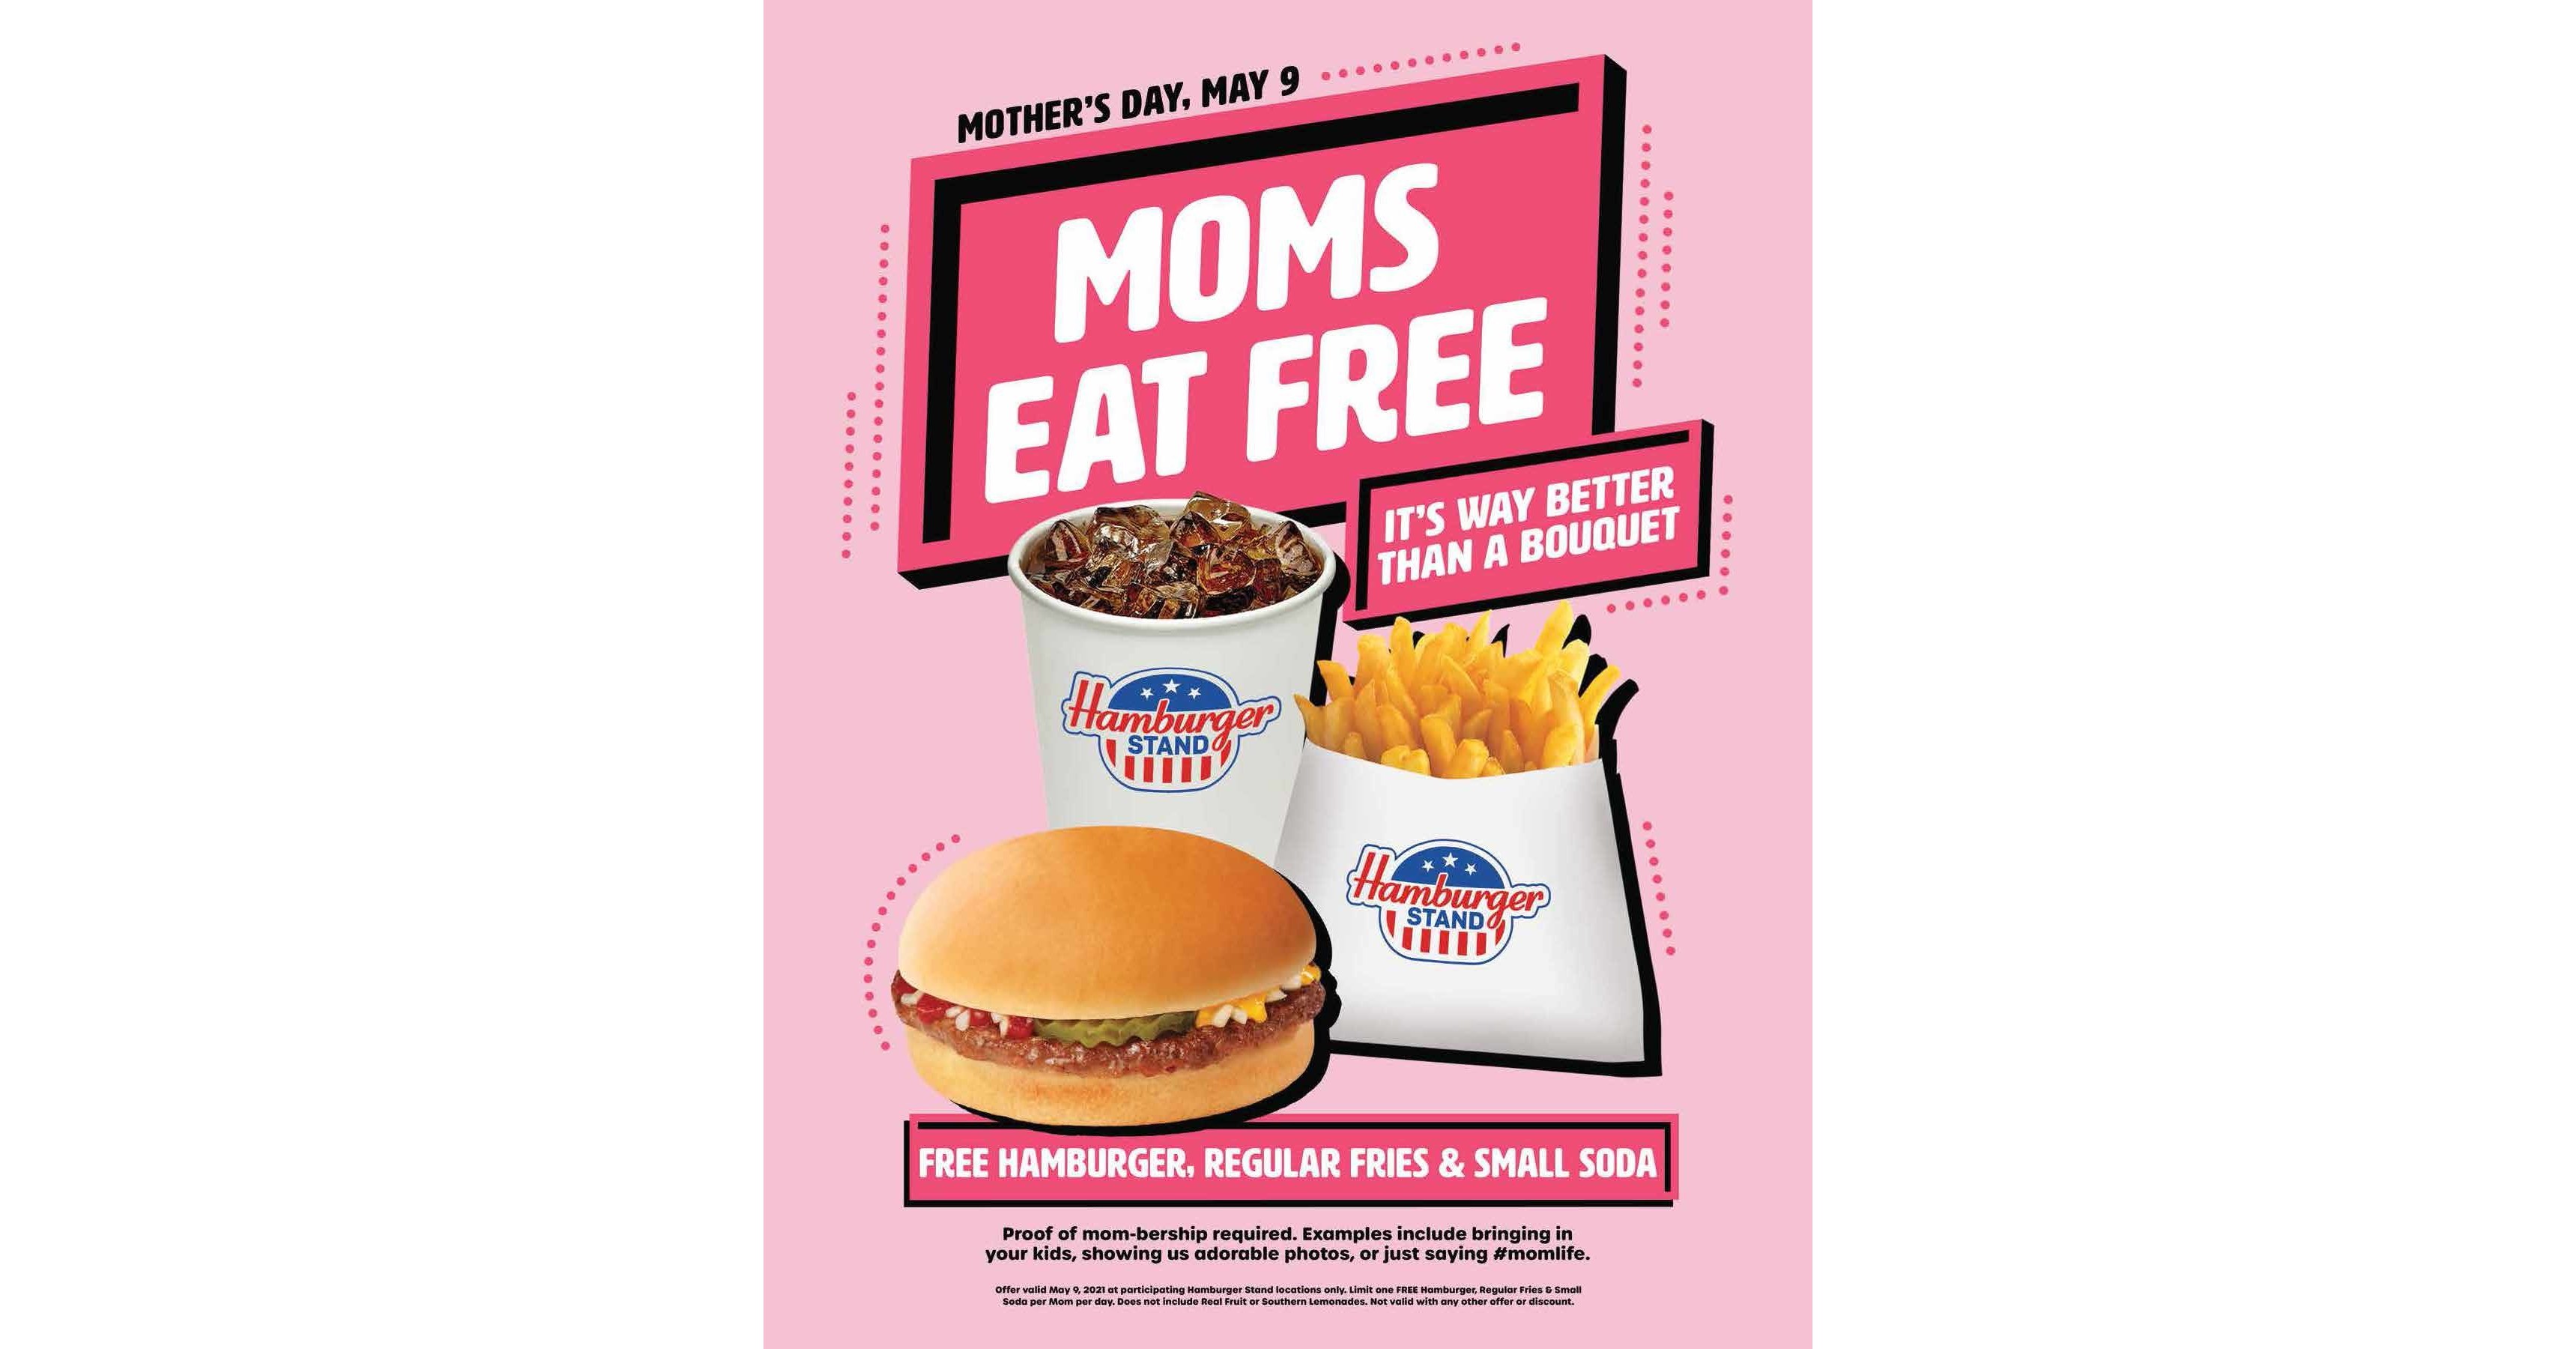 Hamburger Stand Cooks Up Mother's Day Deal: Treats Moms To A